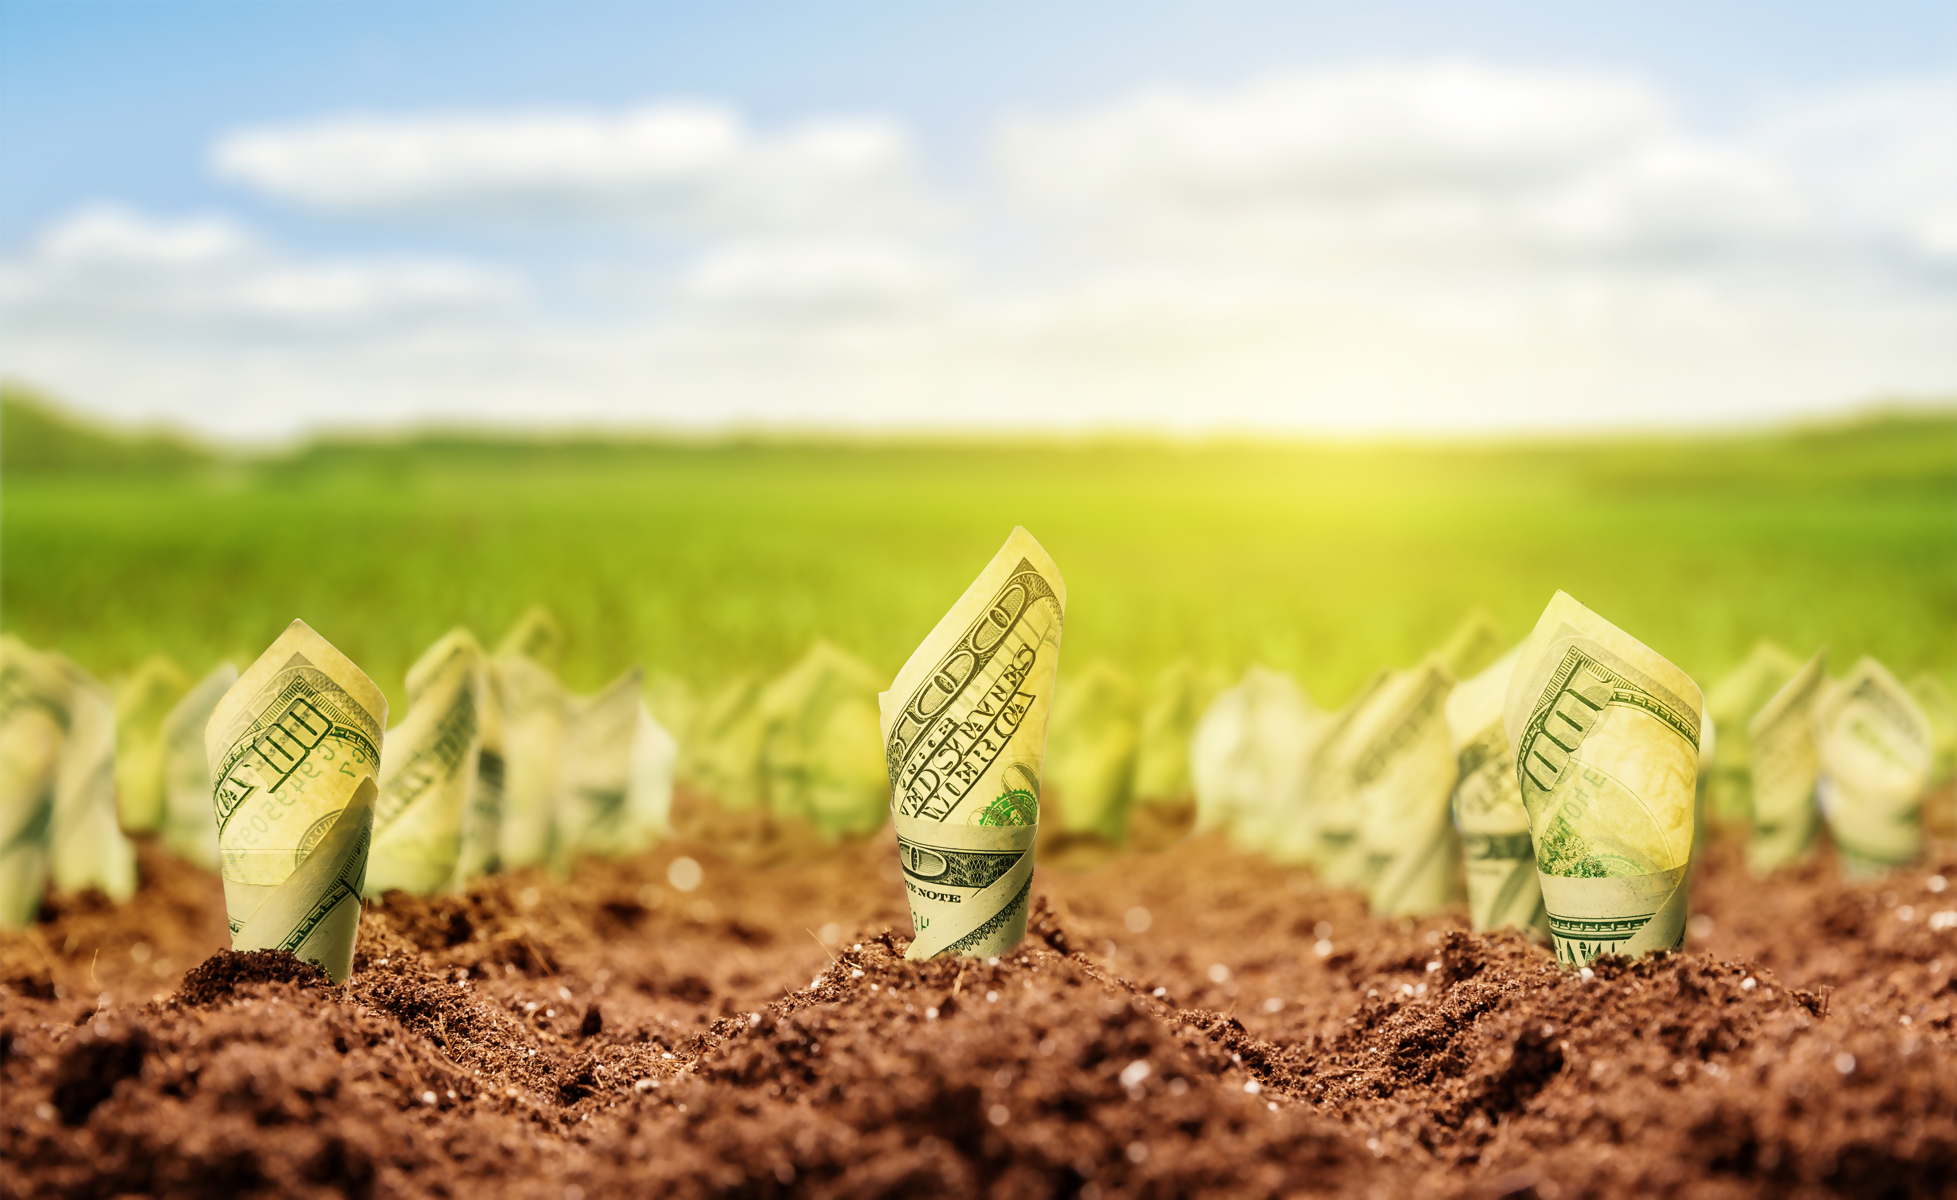 Dollar bills growing out of the ground to be harvested